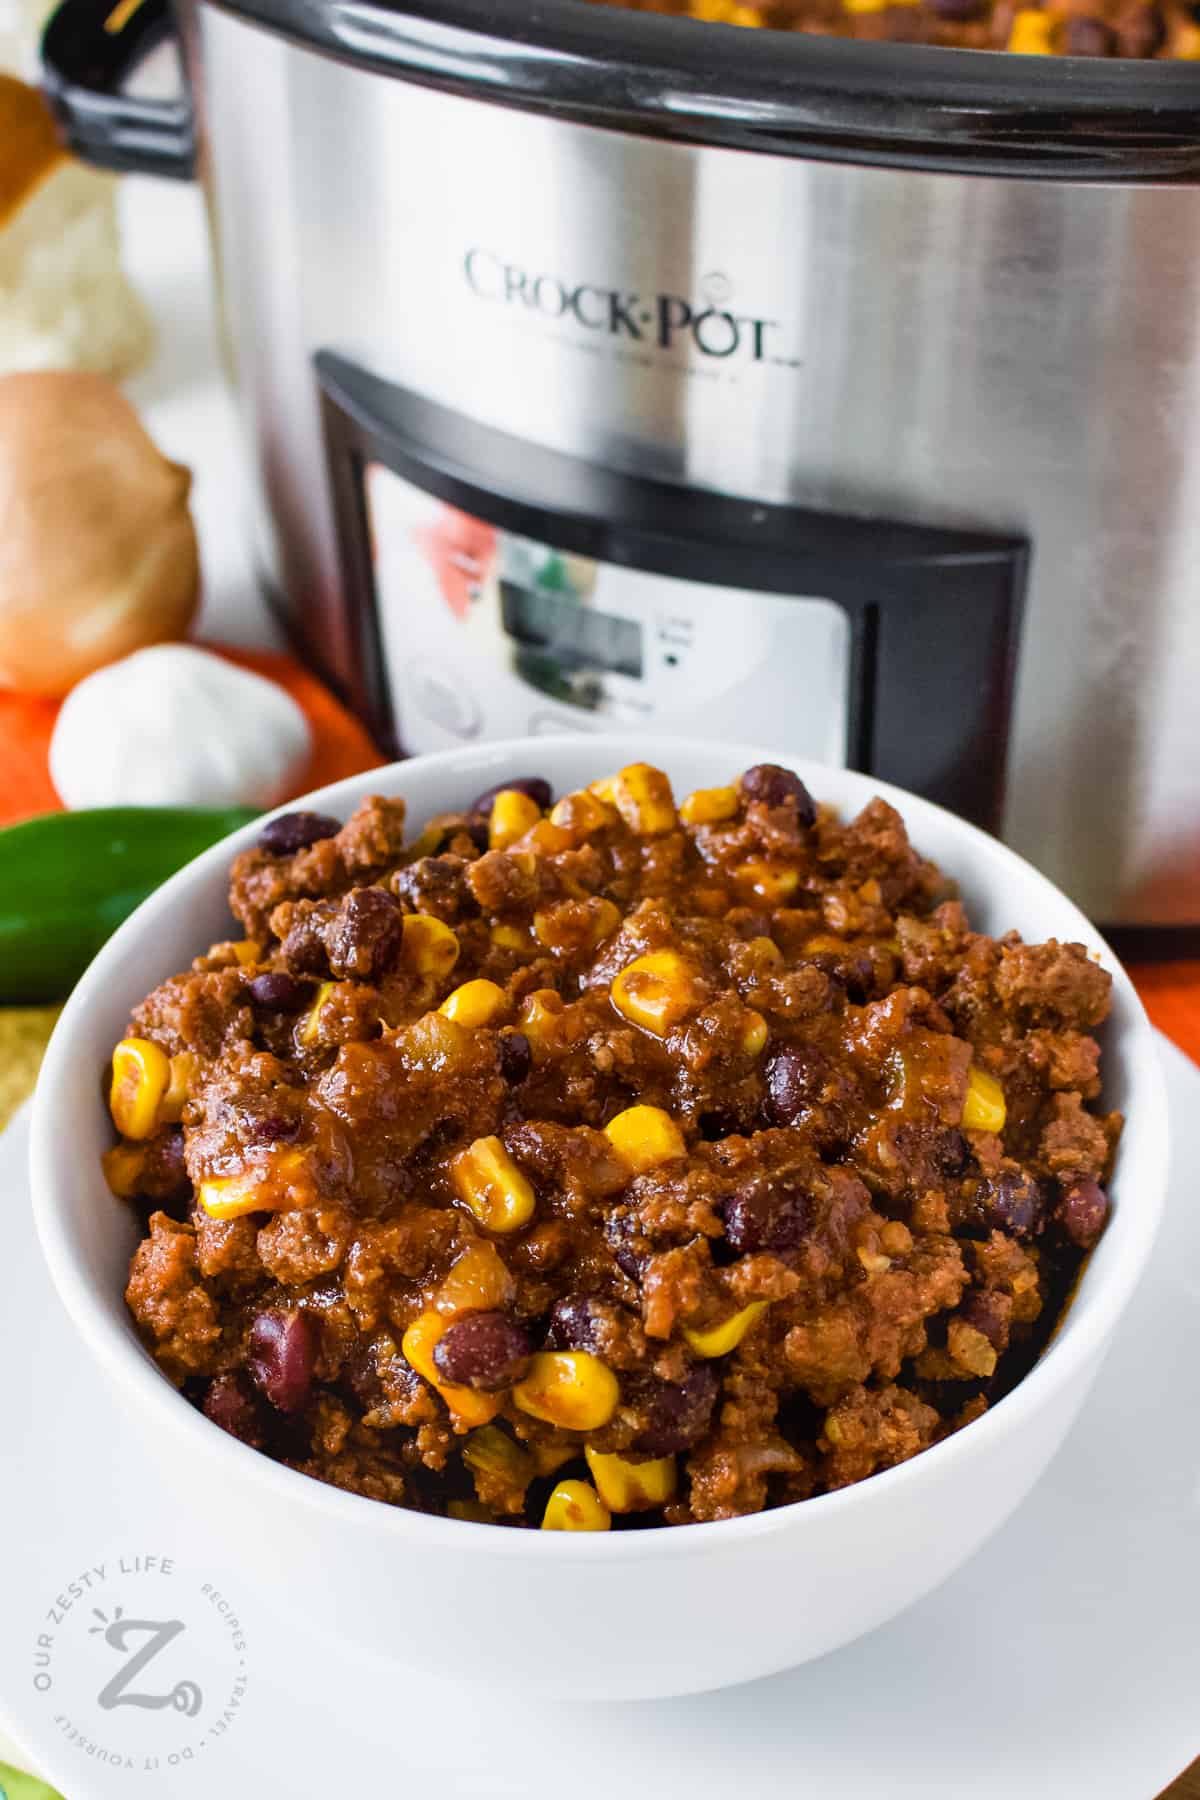 https://ourzestylife.com/wp-content/uploads/2023/03/Easy-Crockpot-Black-Bean-Chili-OurZestyLife-4.jpg